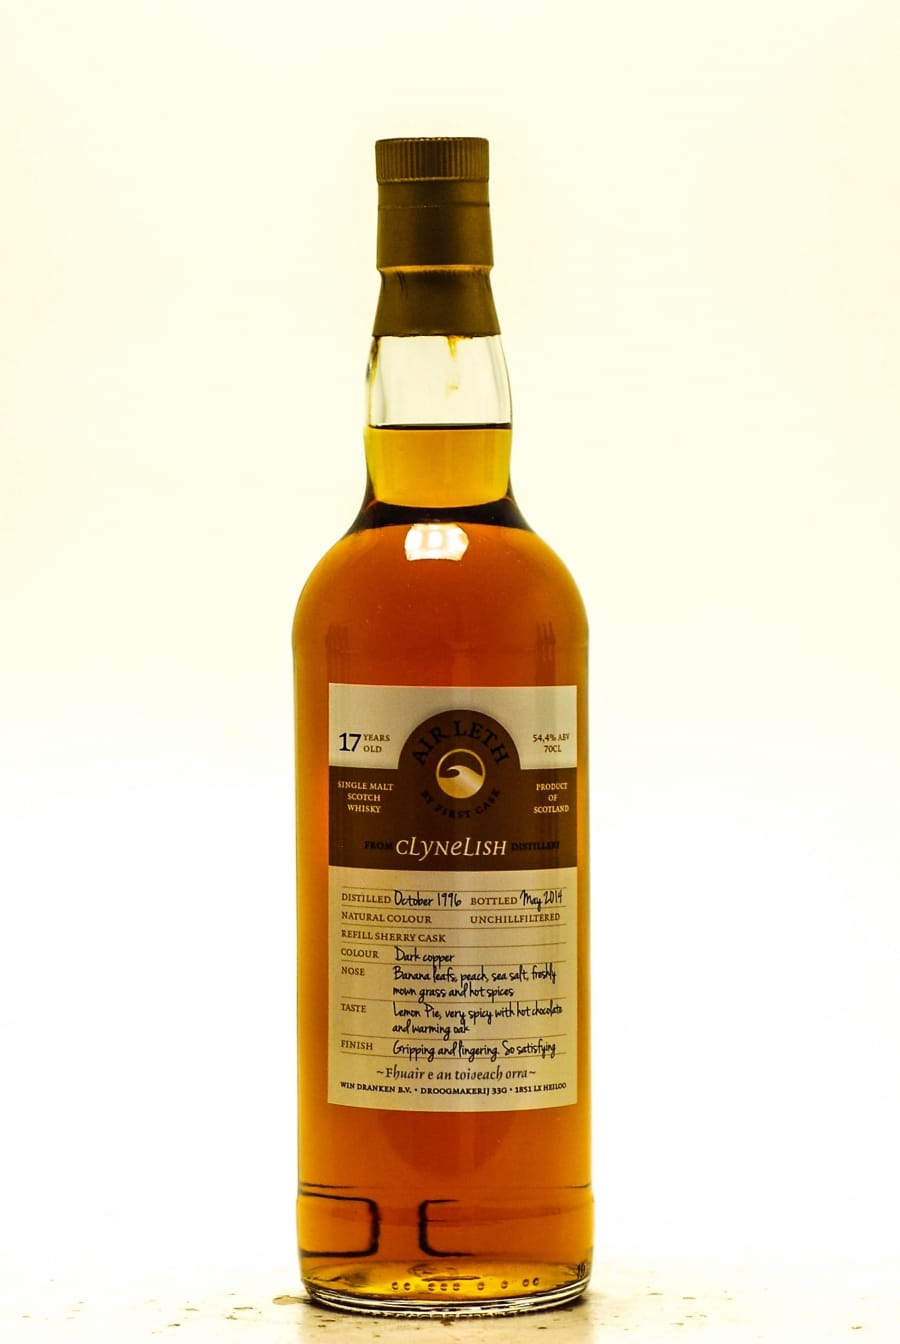 Clynelish - 17 Years Old First Cask 54.4% 1996 Perfect